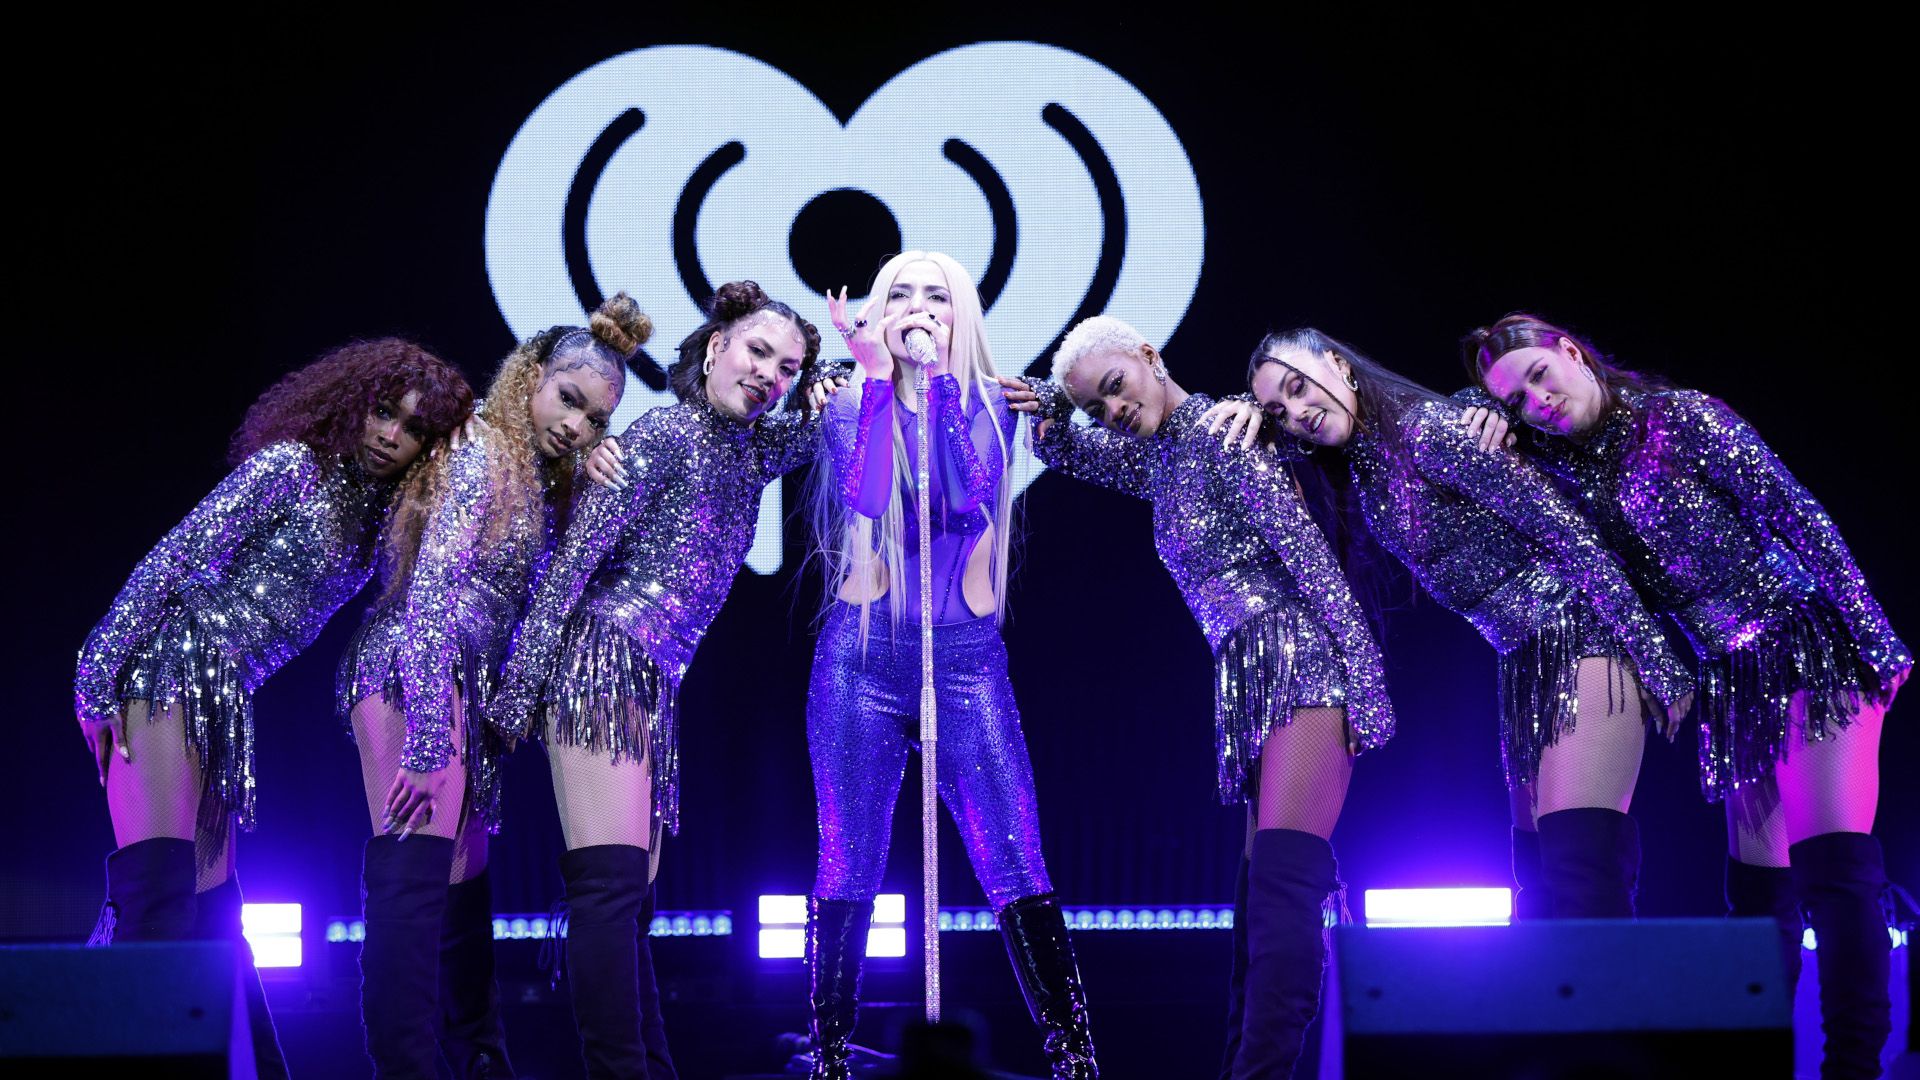 How to watch iHeartRadio Jingle Ball 2022 from anywhere in the world